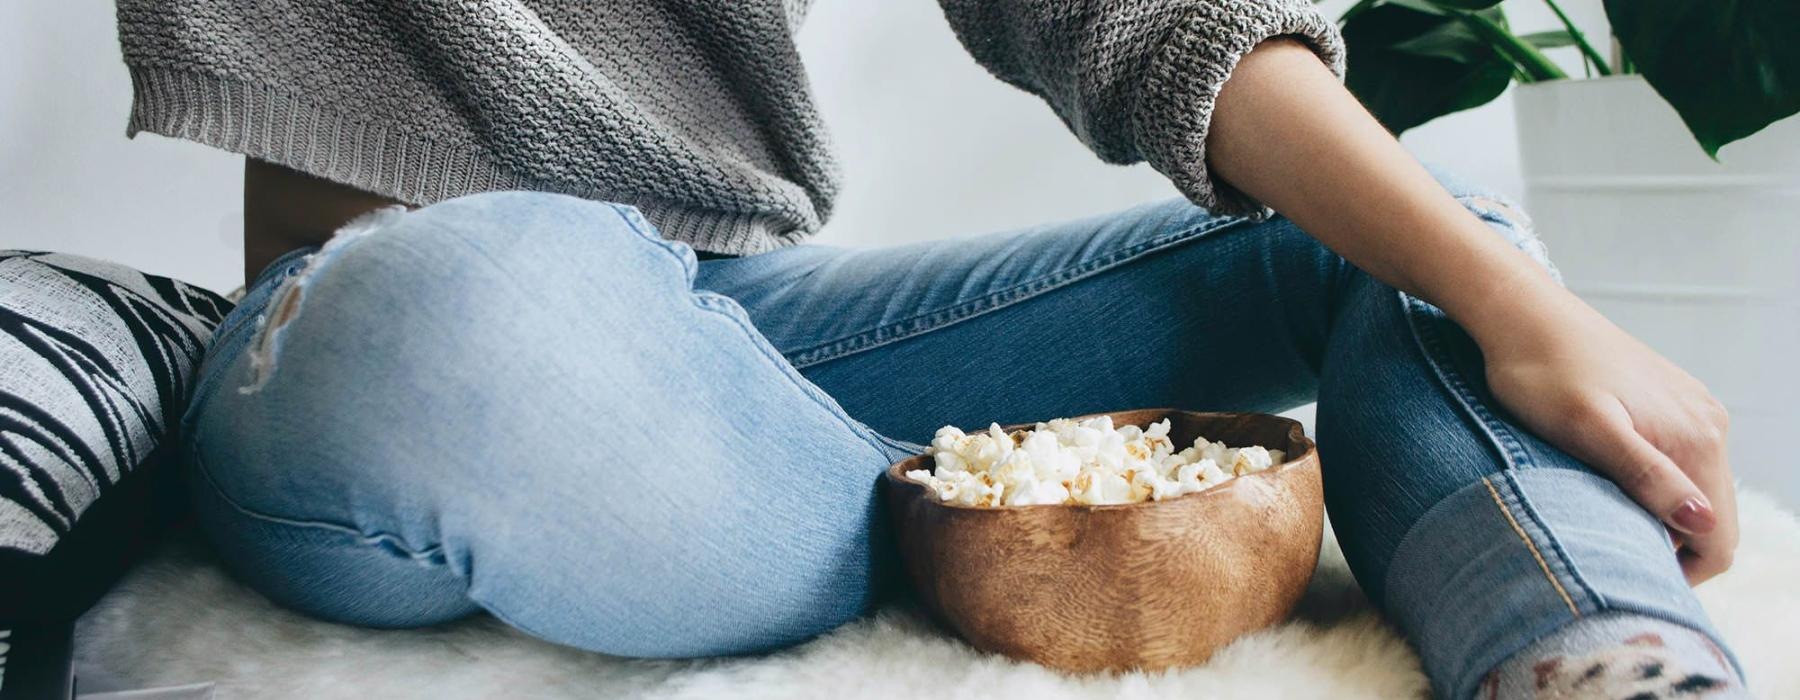 woman sits on a rug with a bowl of popcorn